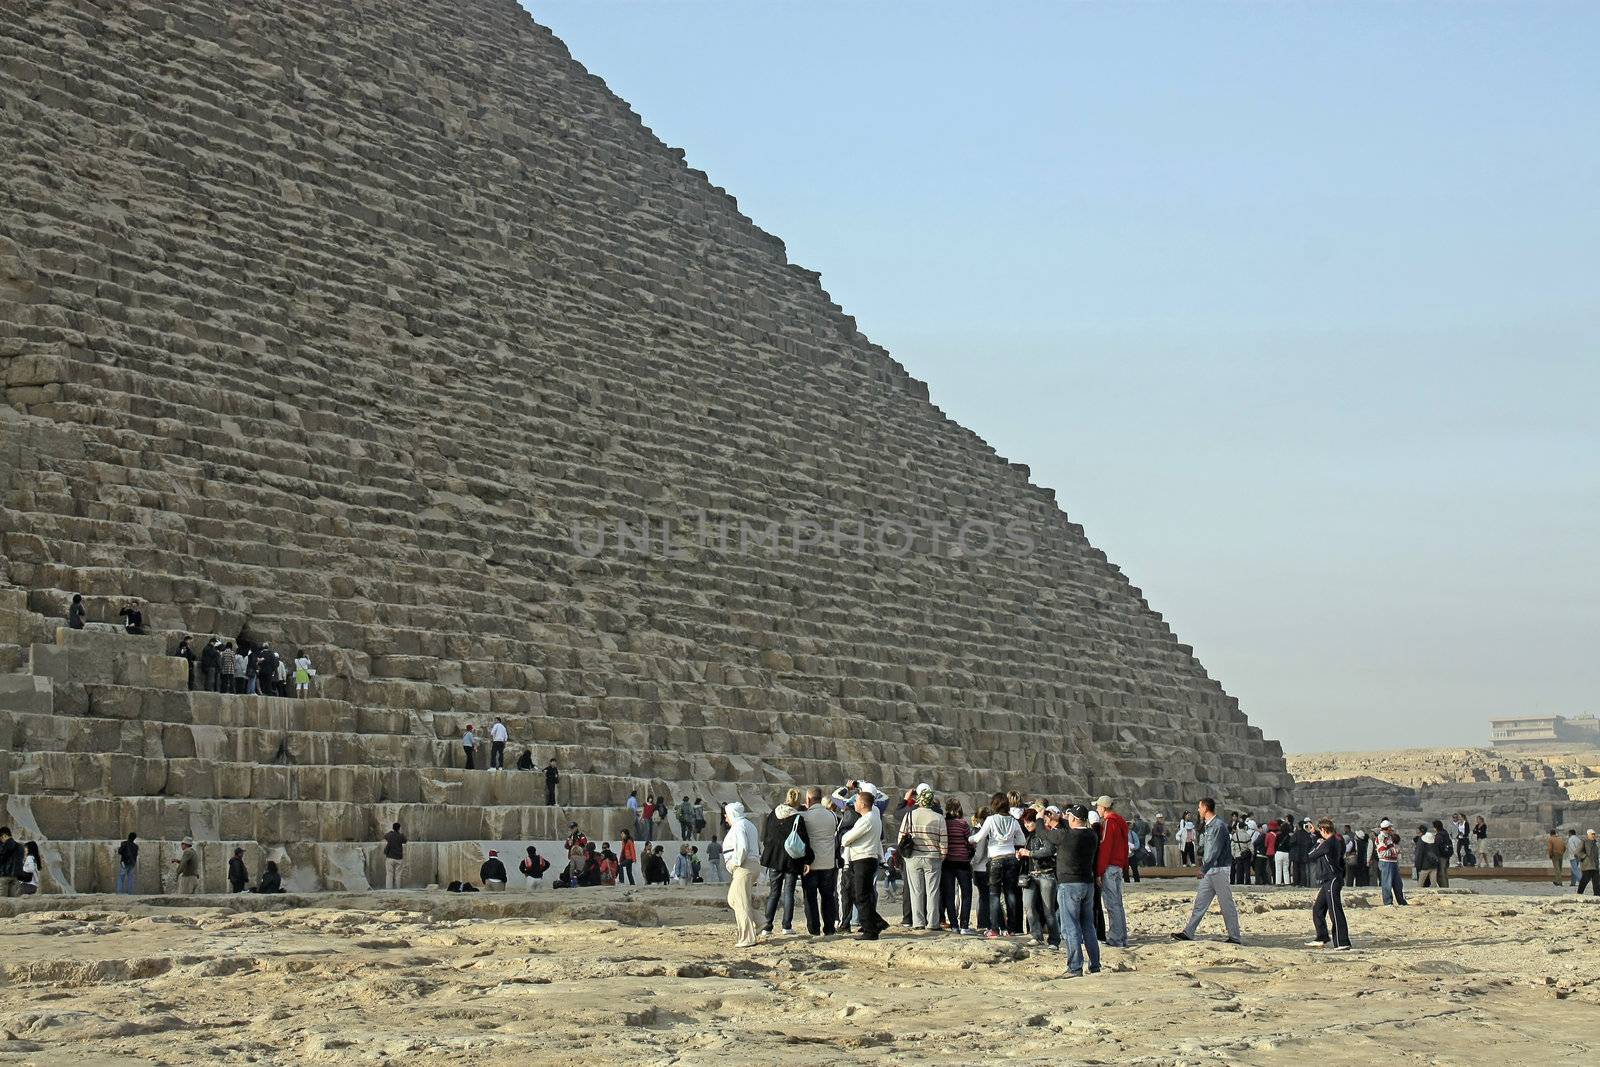 Egypt, Cairo, Giza. A lot of people and looking at the pyramid of Cheops.